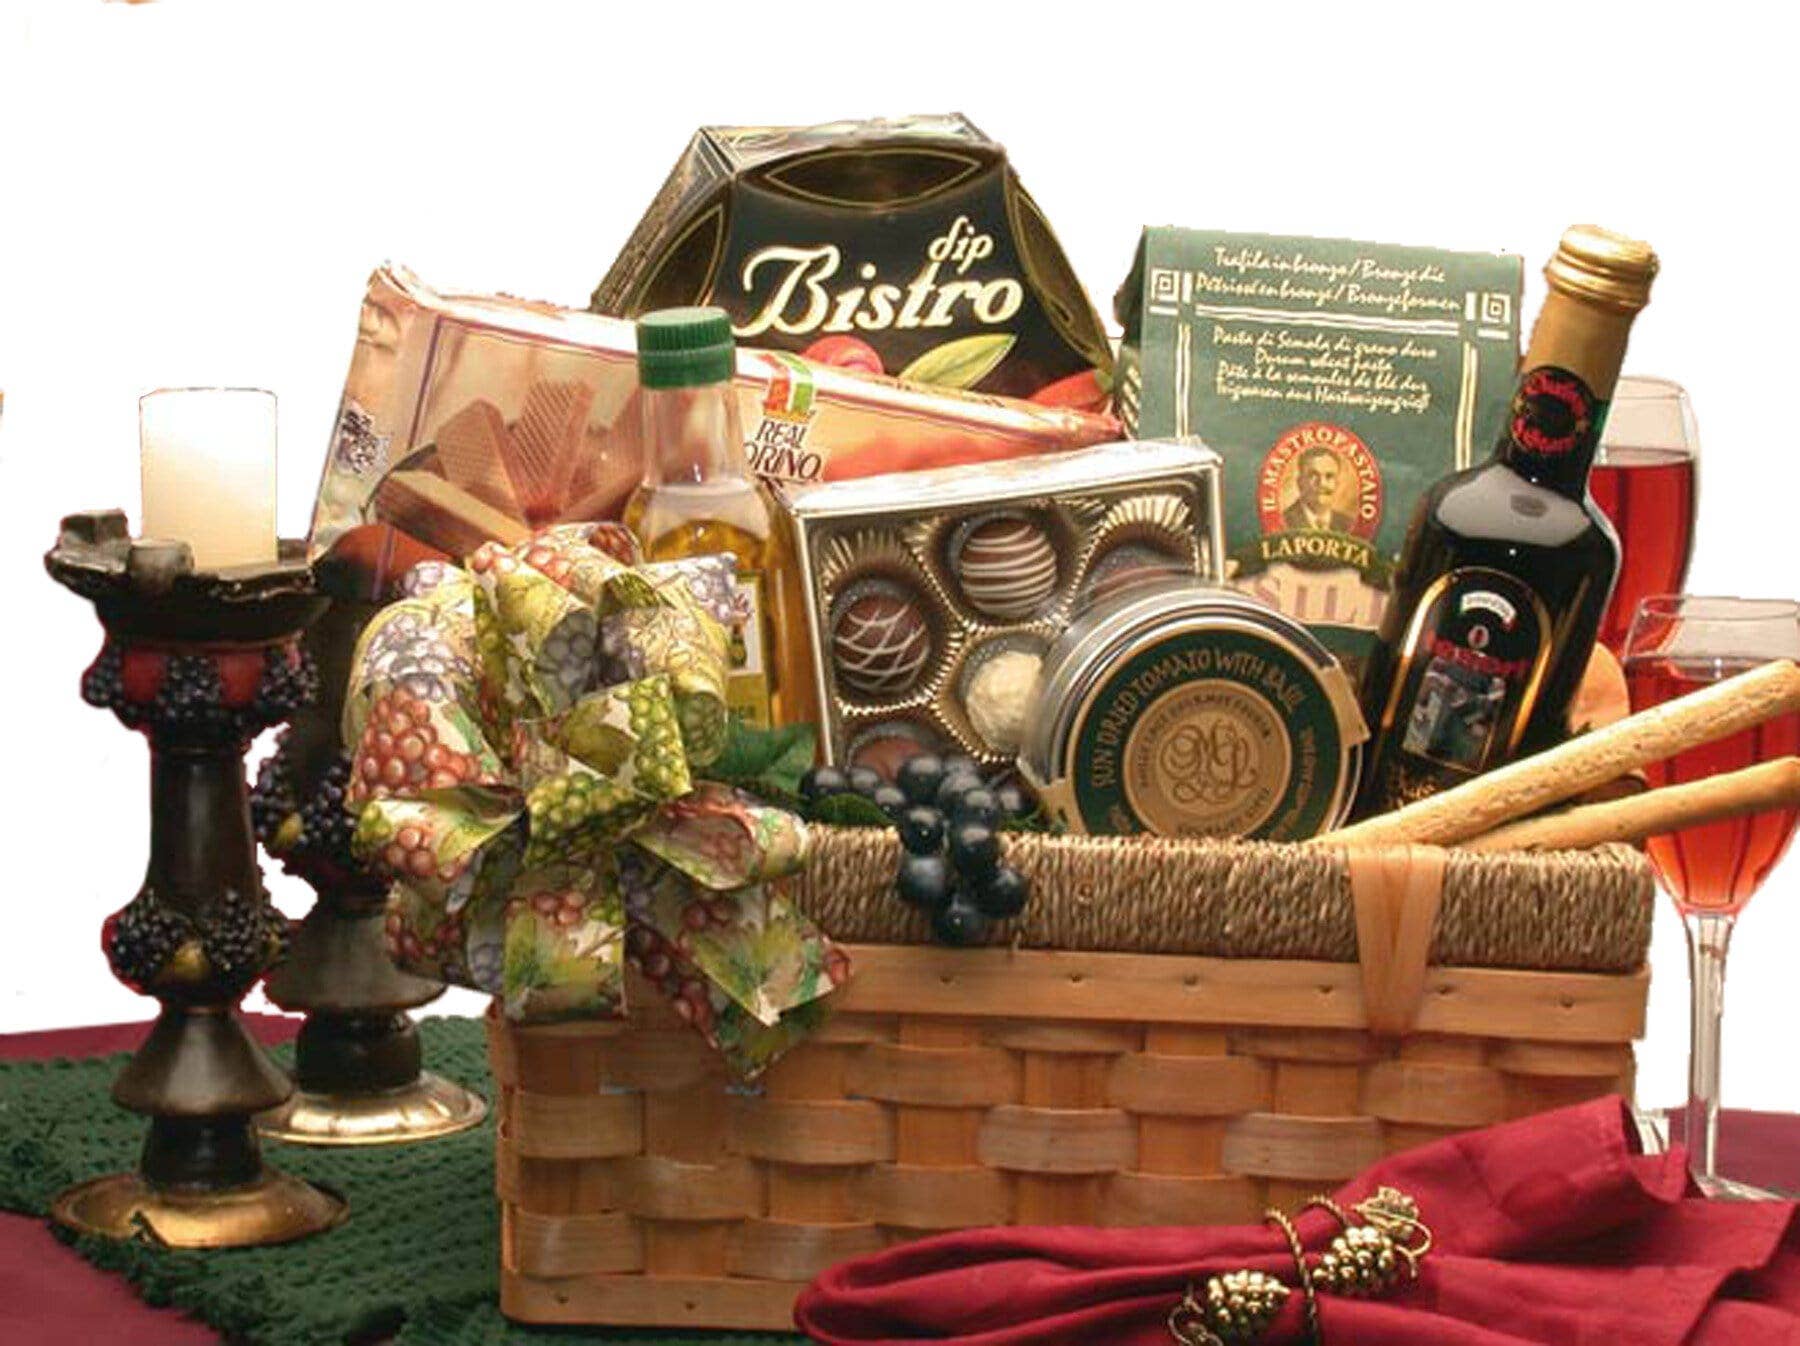 Wholesale Christmas Create your own hamper | Christmas baskets wholesale